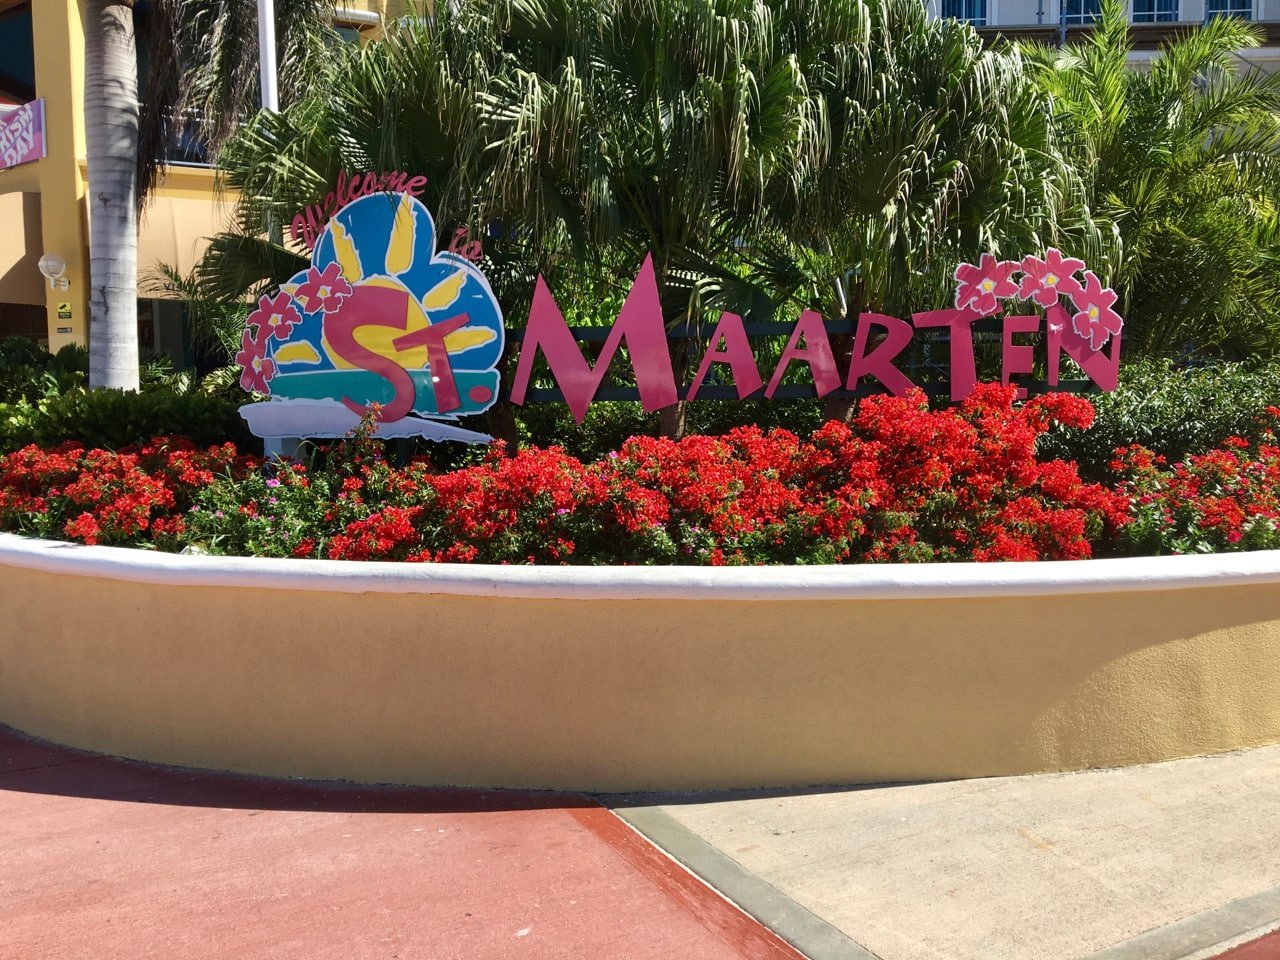 There is no doubt where you are as you enter town in St. Maarten.